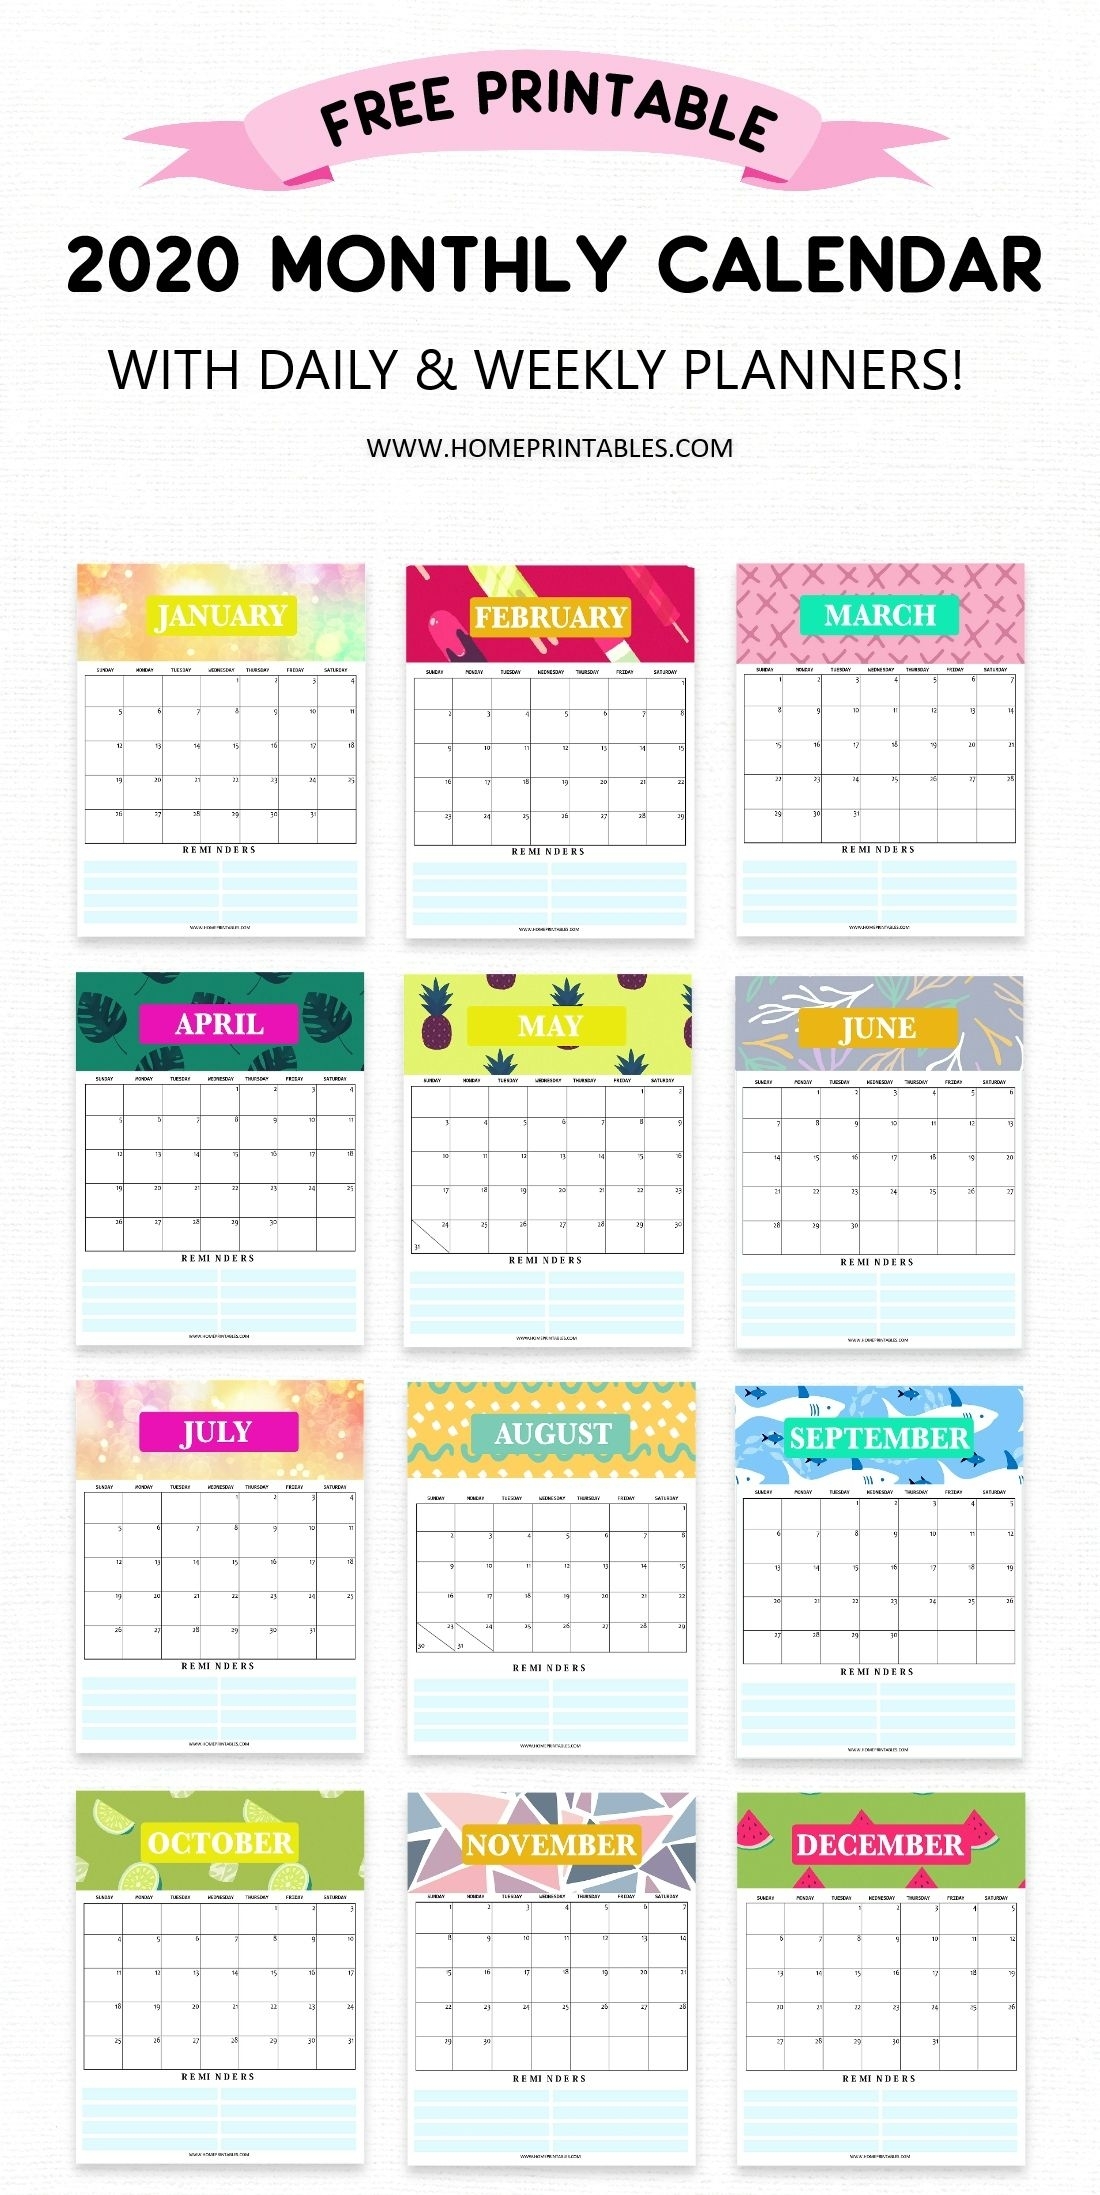 Free Calendar 2020 Printable With Weekly Planner: So Pretty